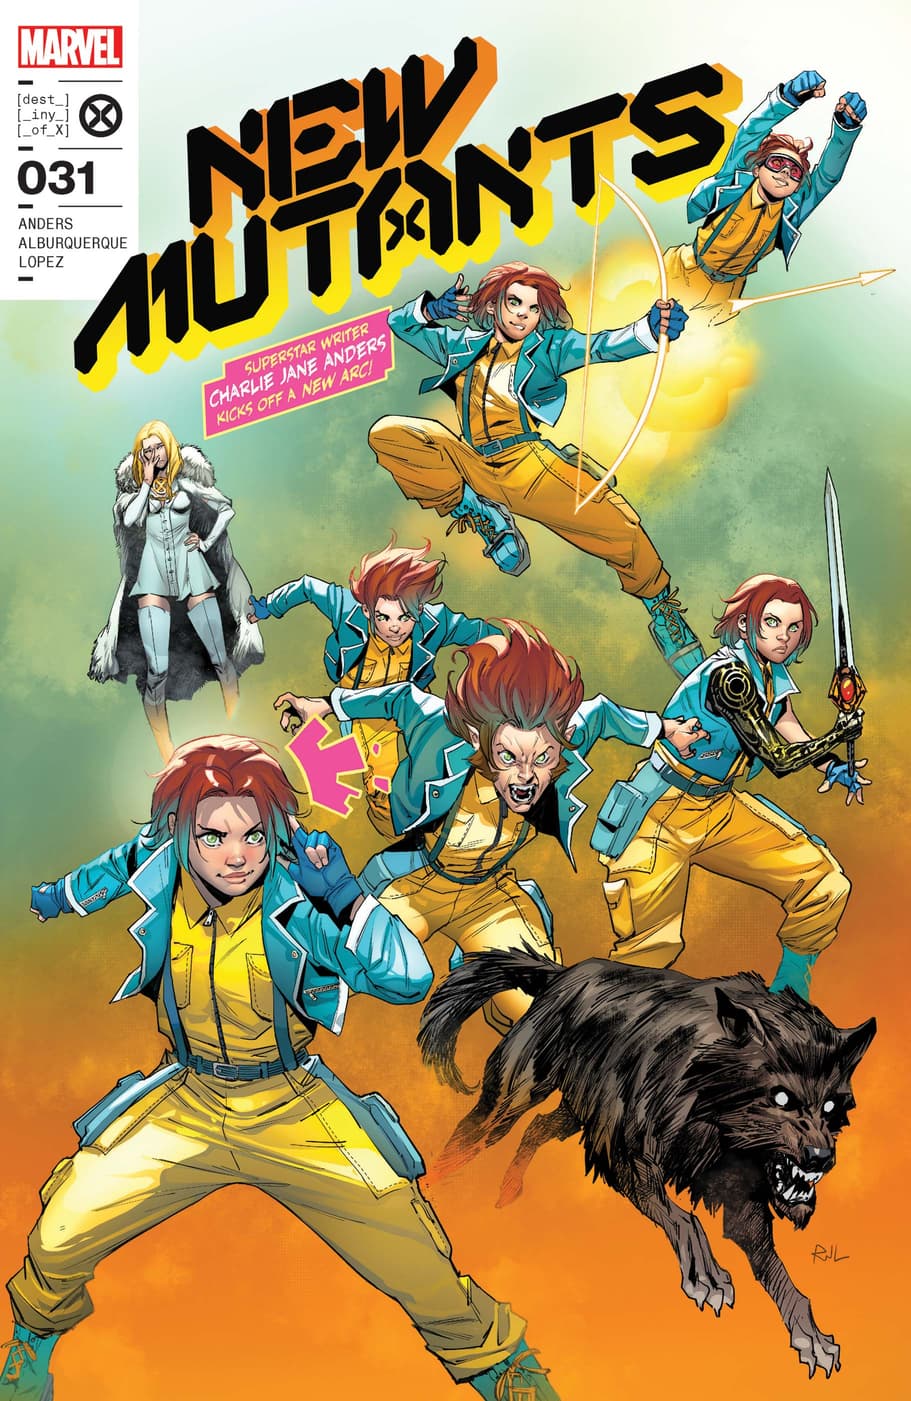 NEW MUTANTS #31 cover by Ro Stein and Ted Brandt